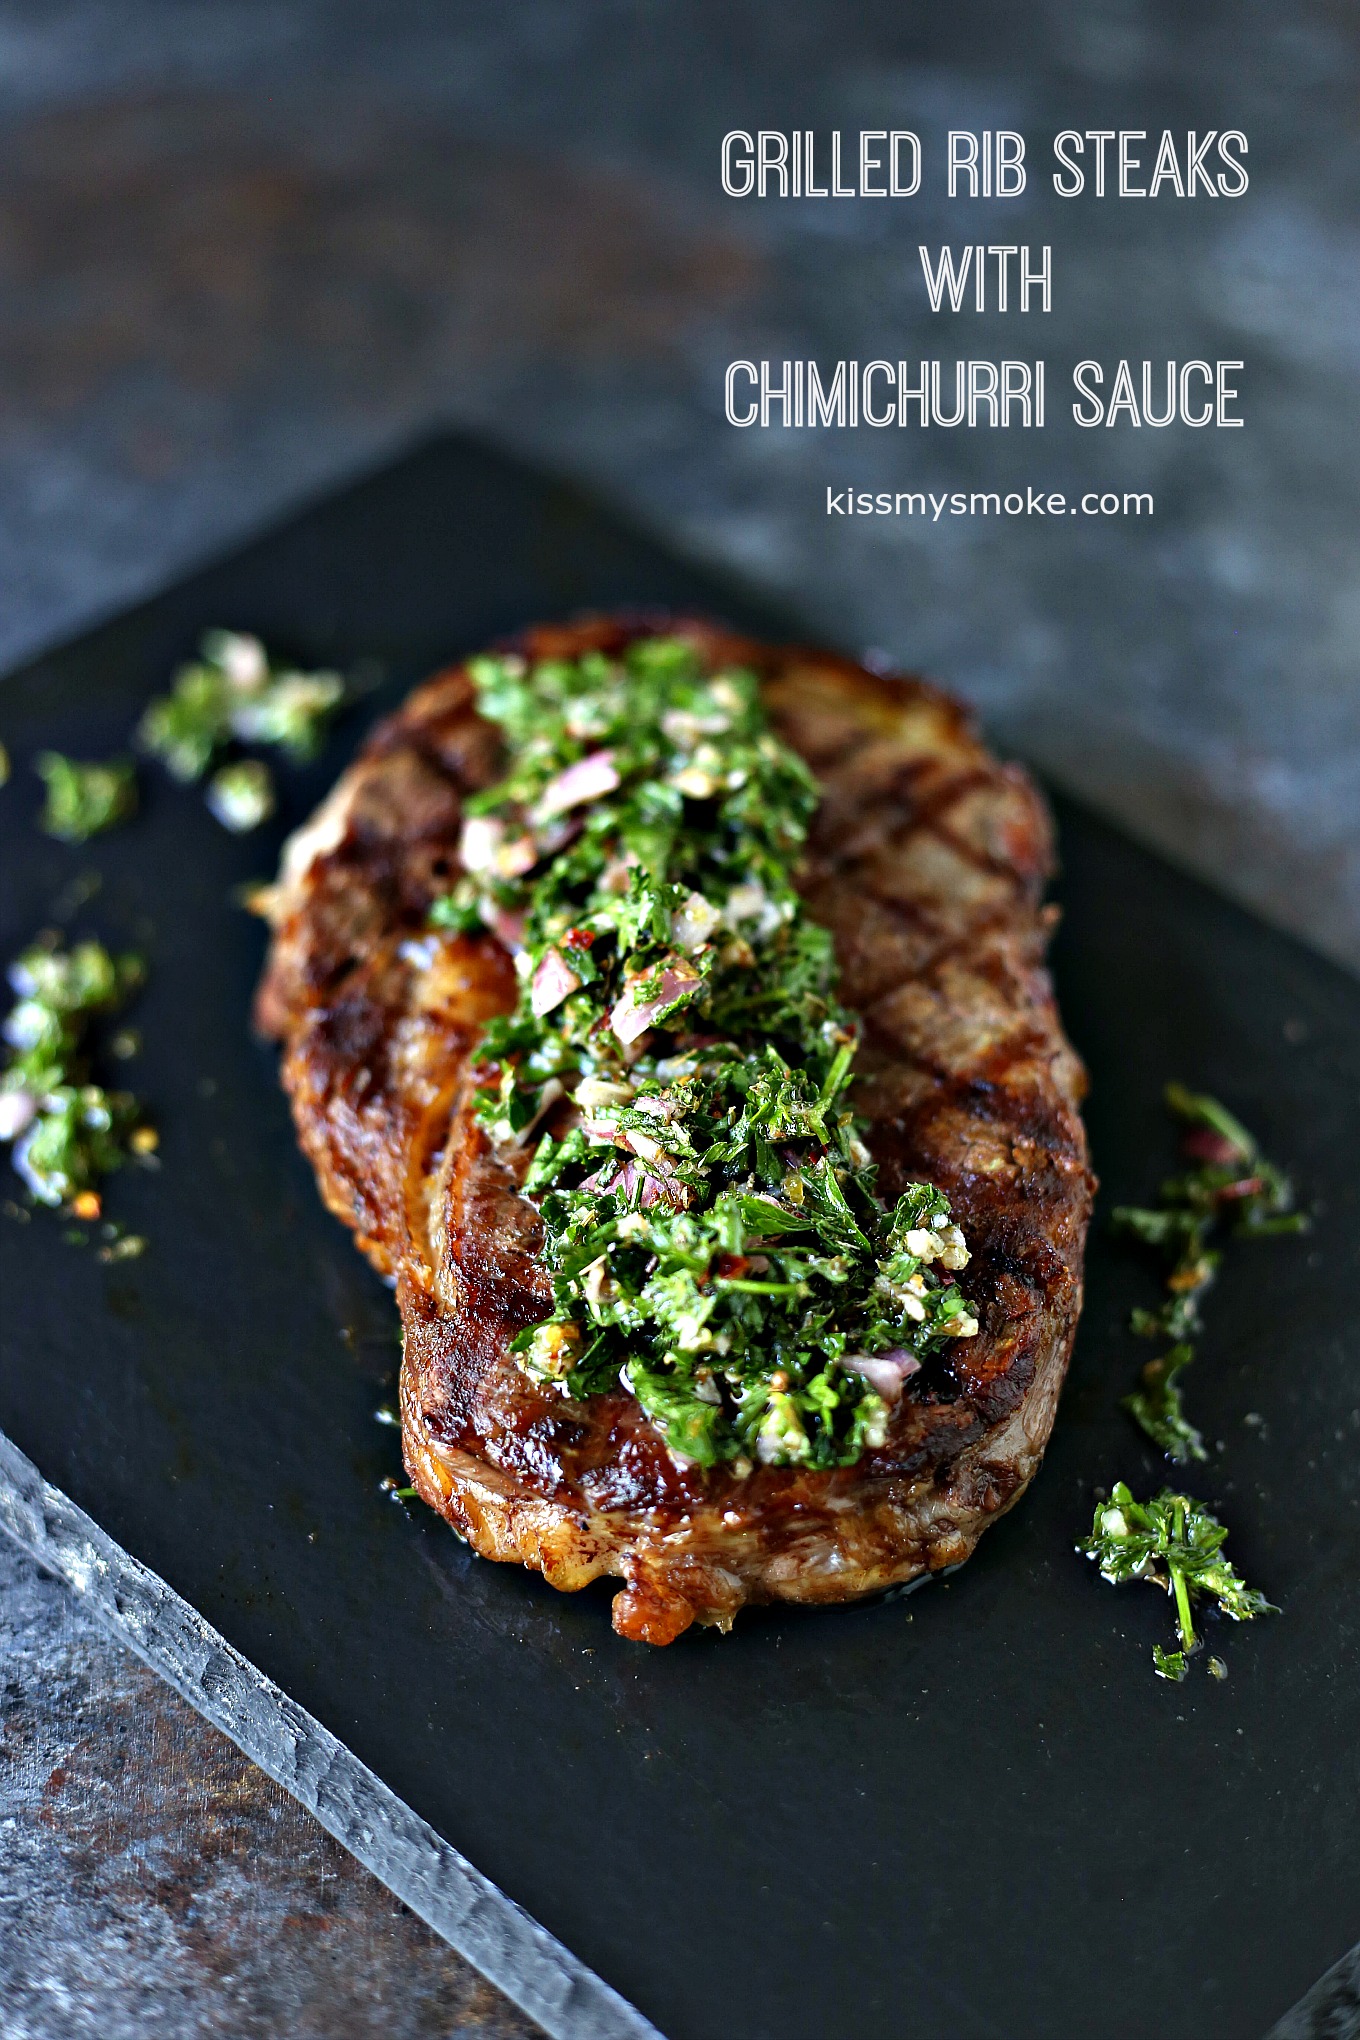 Grilled Rib Steaks with Chimichurri Sauce from kismysmoke.com- Fire up that grill and whip up a tasty dinner of Grilled Rib Steaks with Chimichurri Sauce. Serve with your favourite side dish and some NY Bakery Texas Toast.